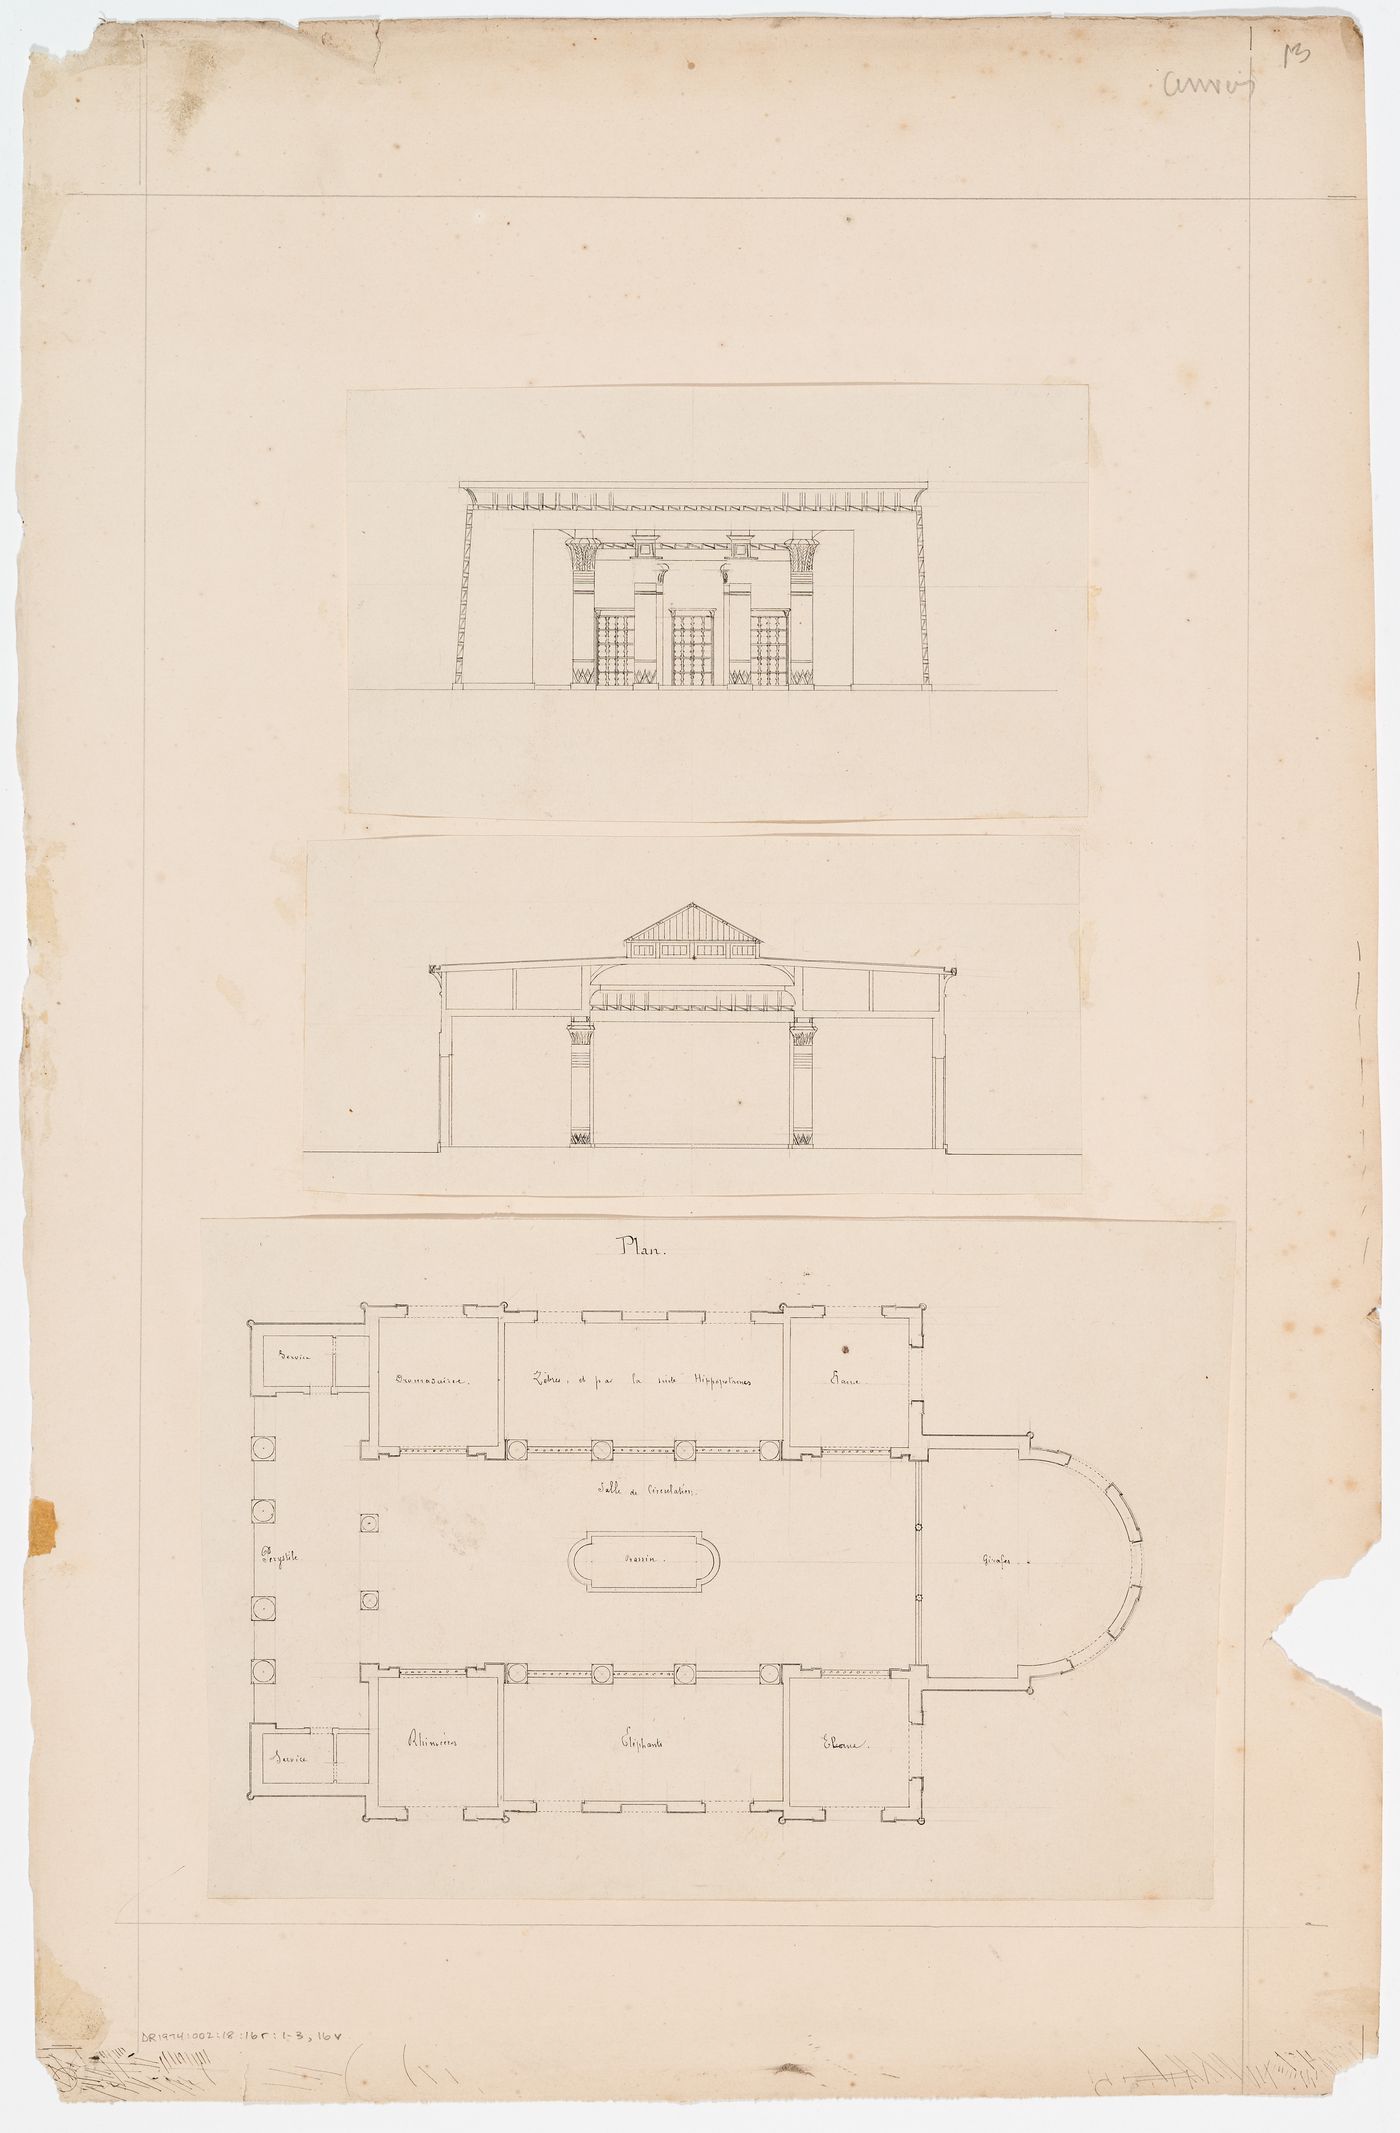 Zoological garden, Antwerp: Elevation, section, and plan of the Palais égyptien